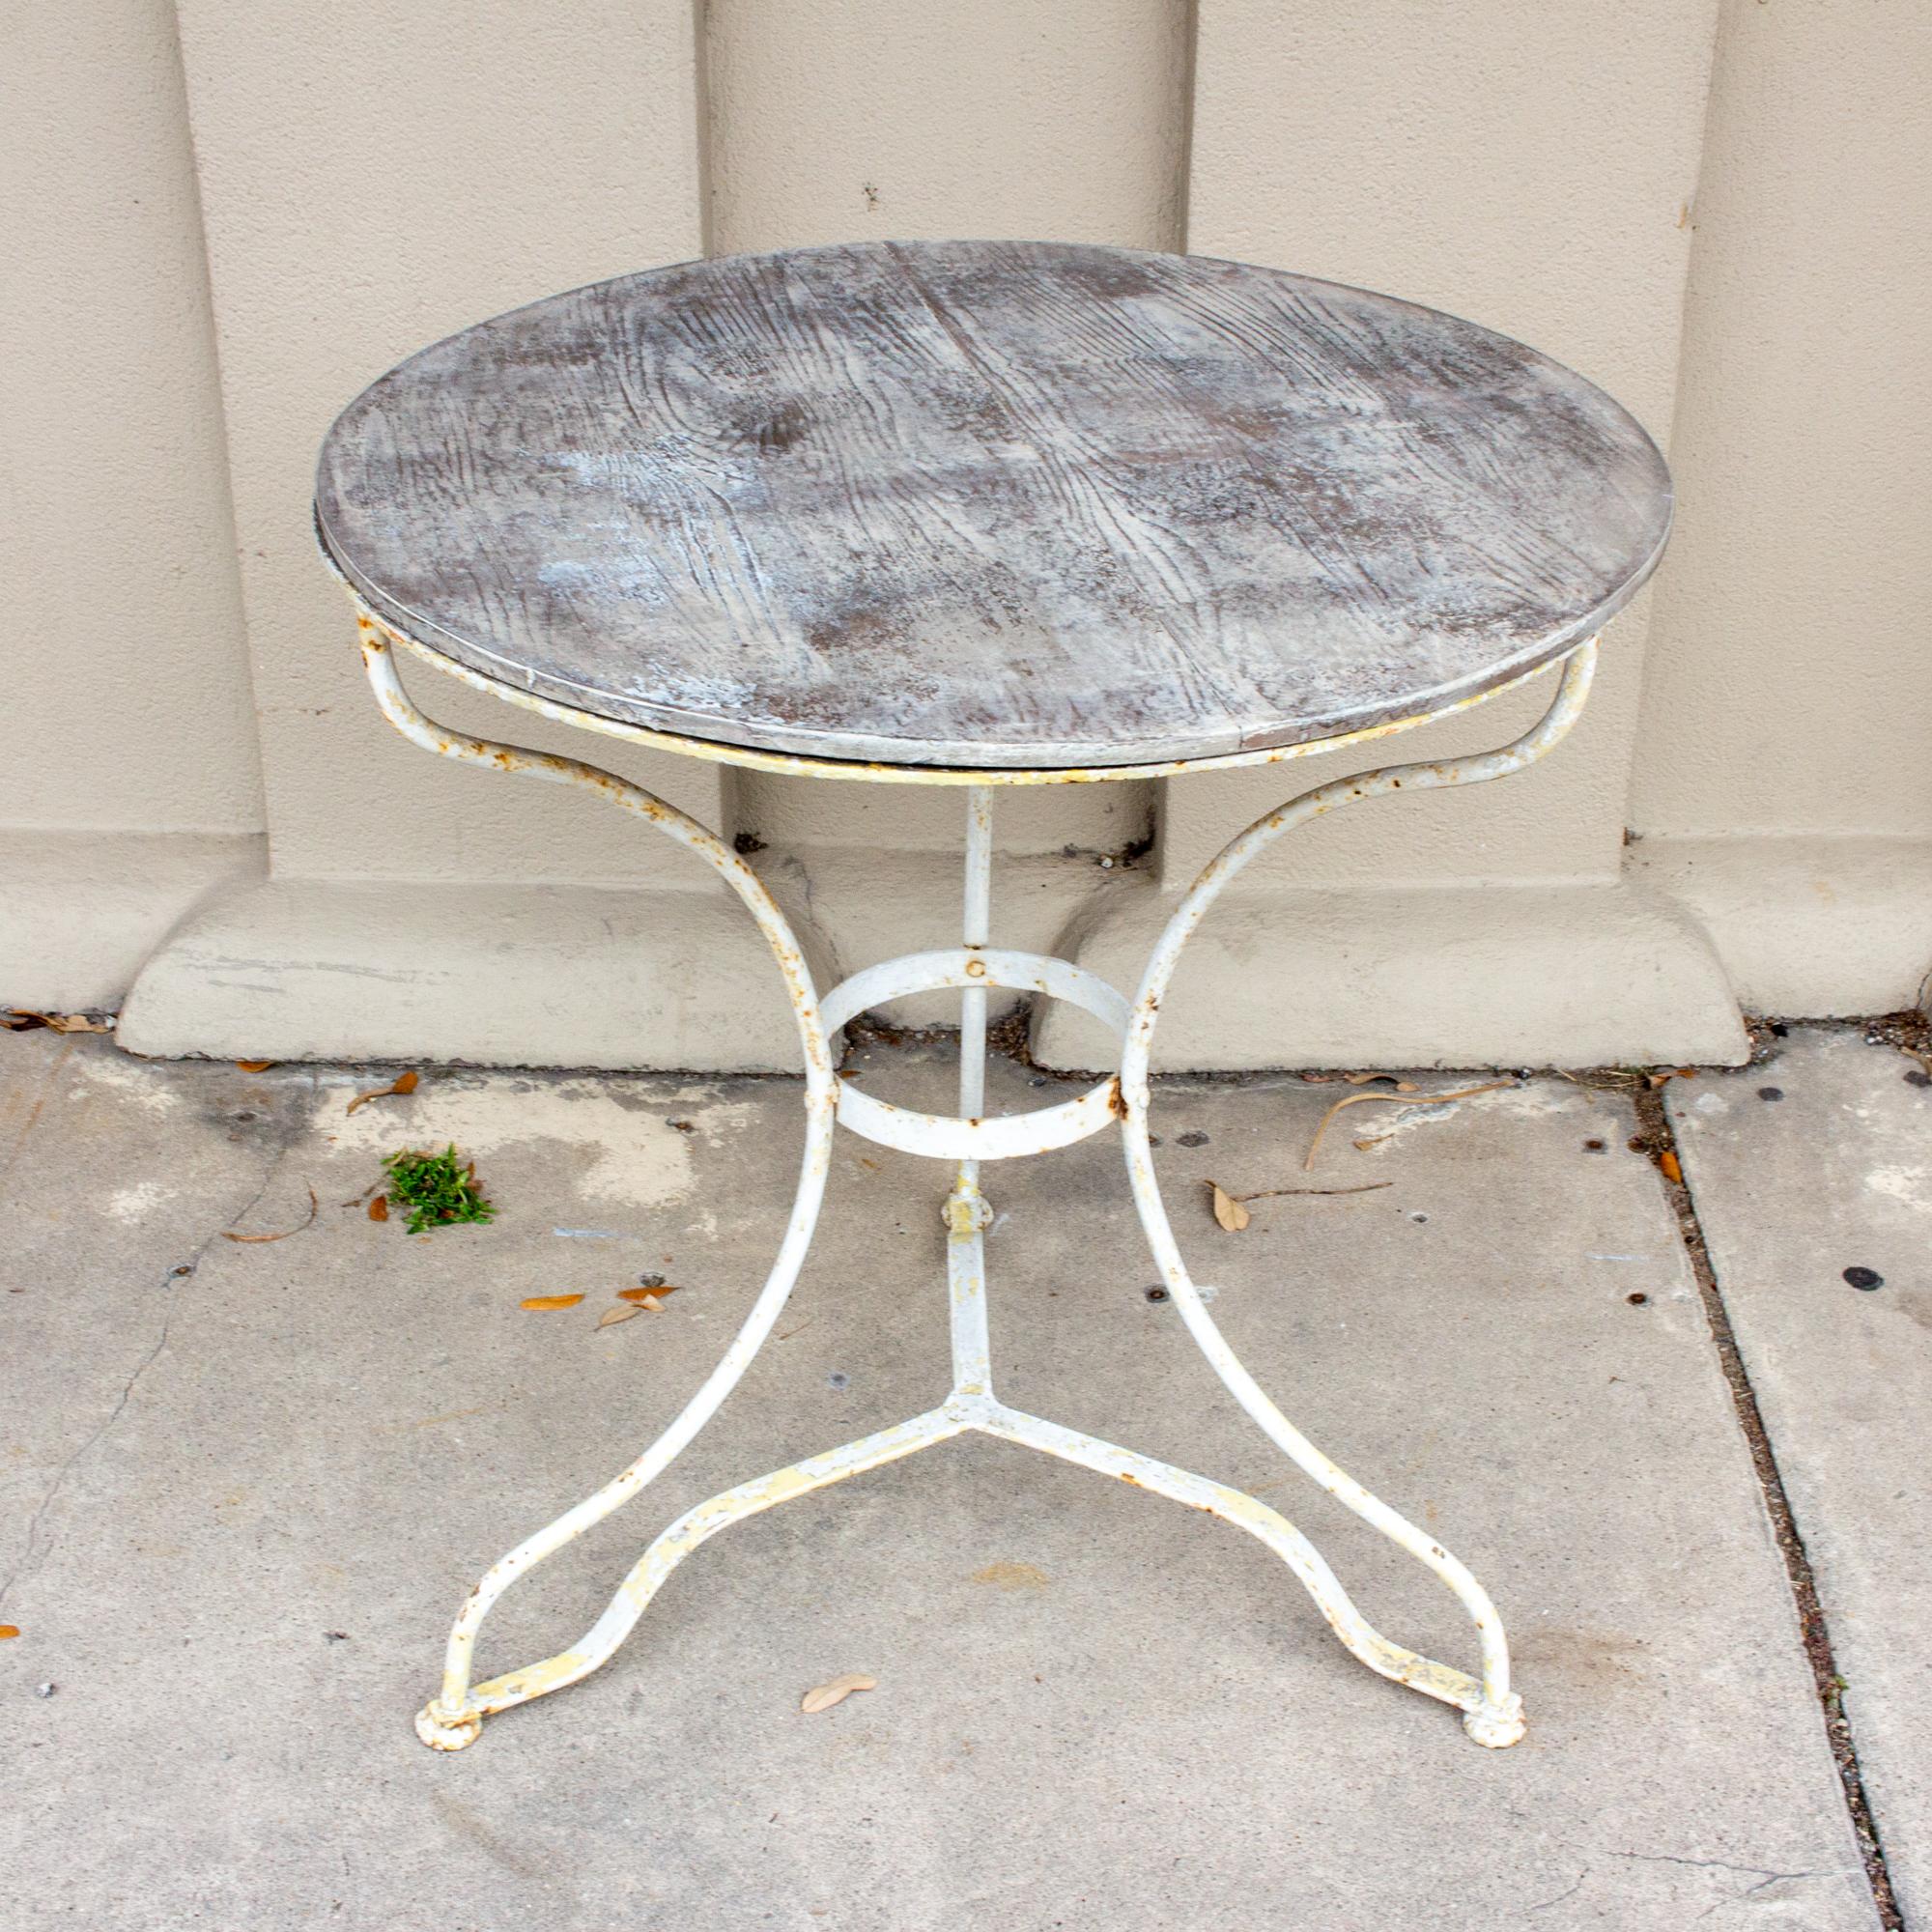 A Classic French iron bistro table, this piece features a painted iron base with three legs and a ring detail. The base has been painted both yellow and white and has some discoloration and patination (shown in the images) and some rust is present.